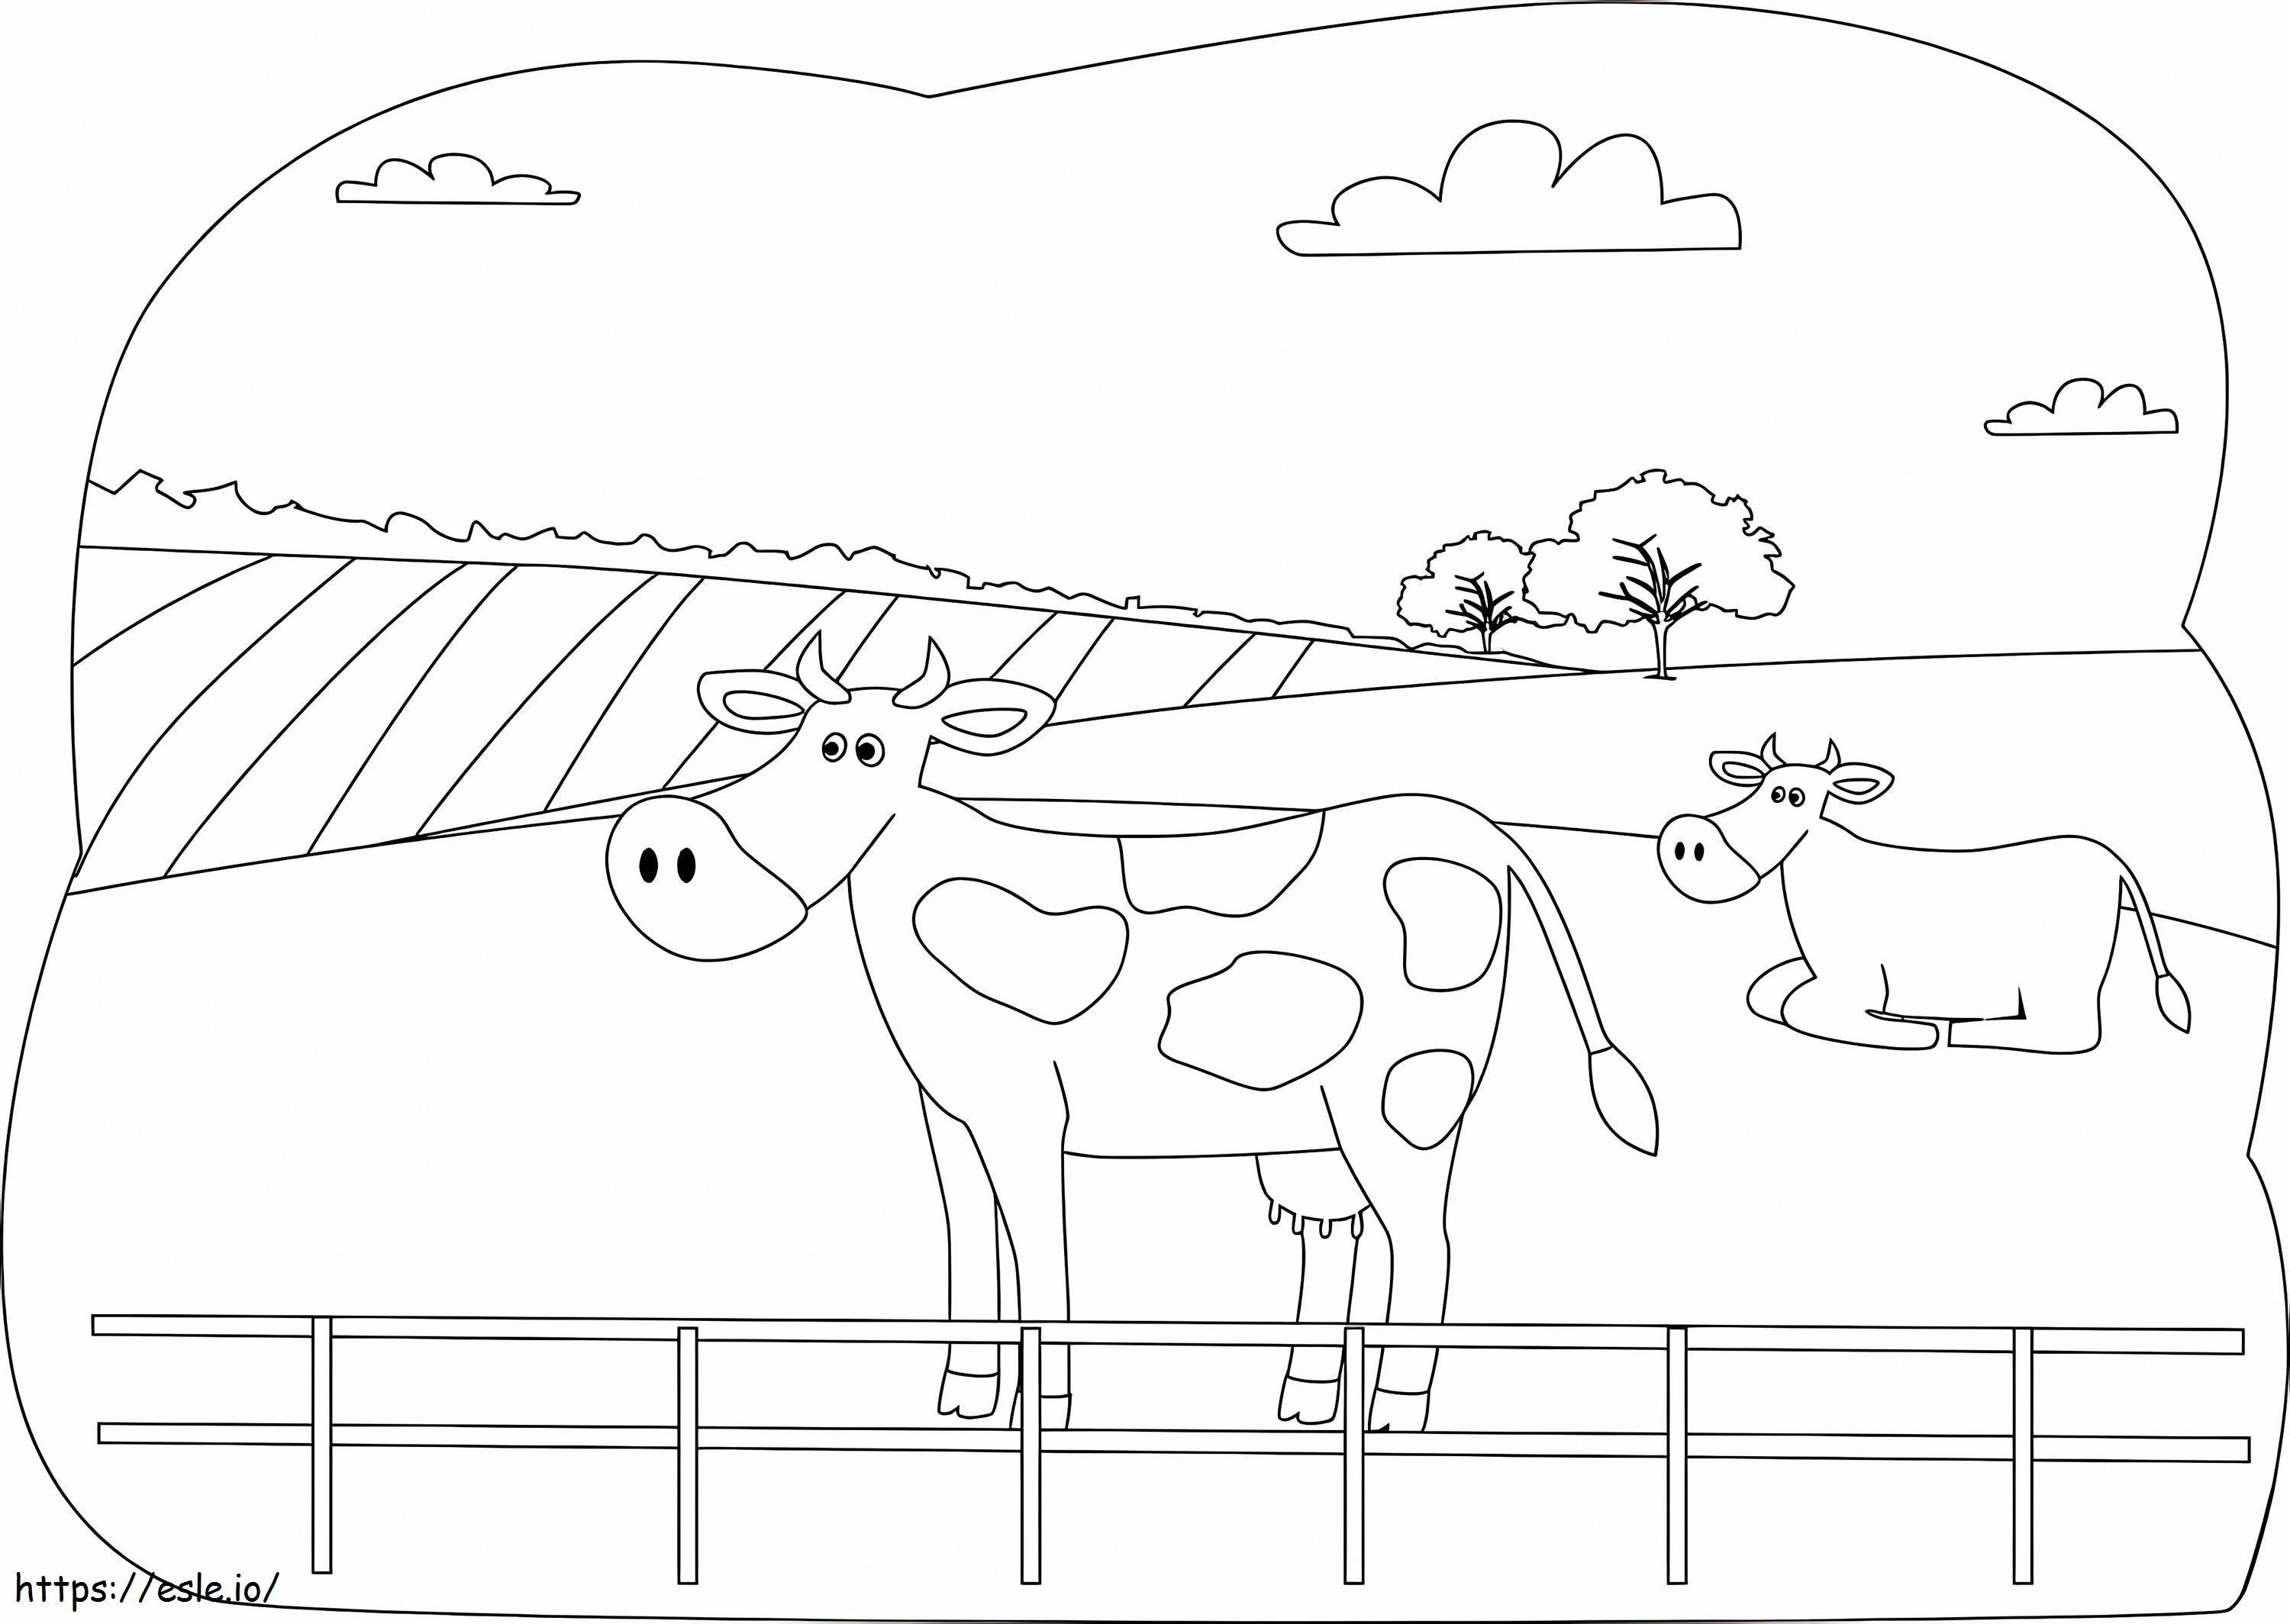 Two Cows coloring page